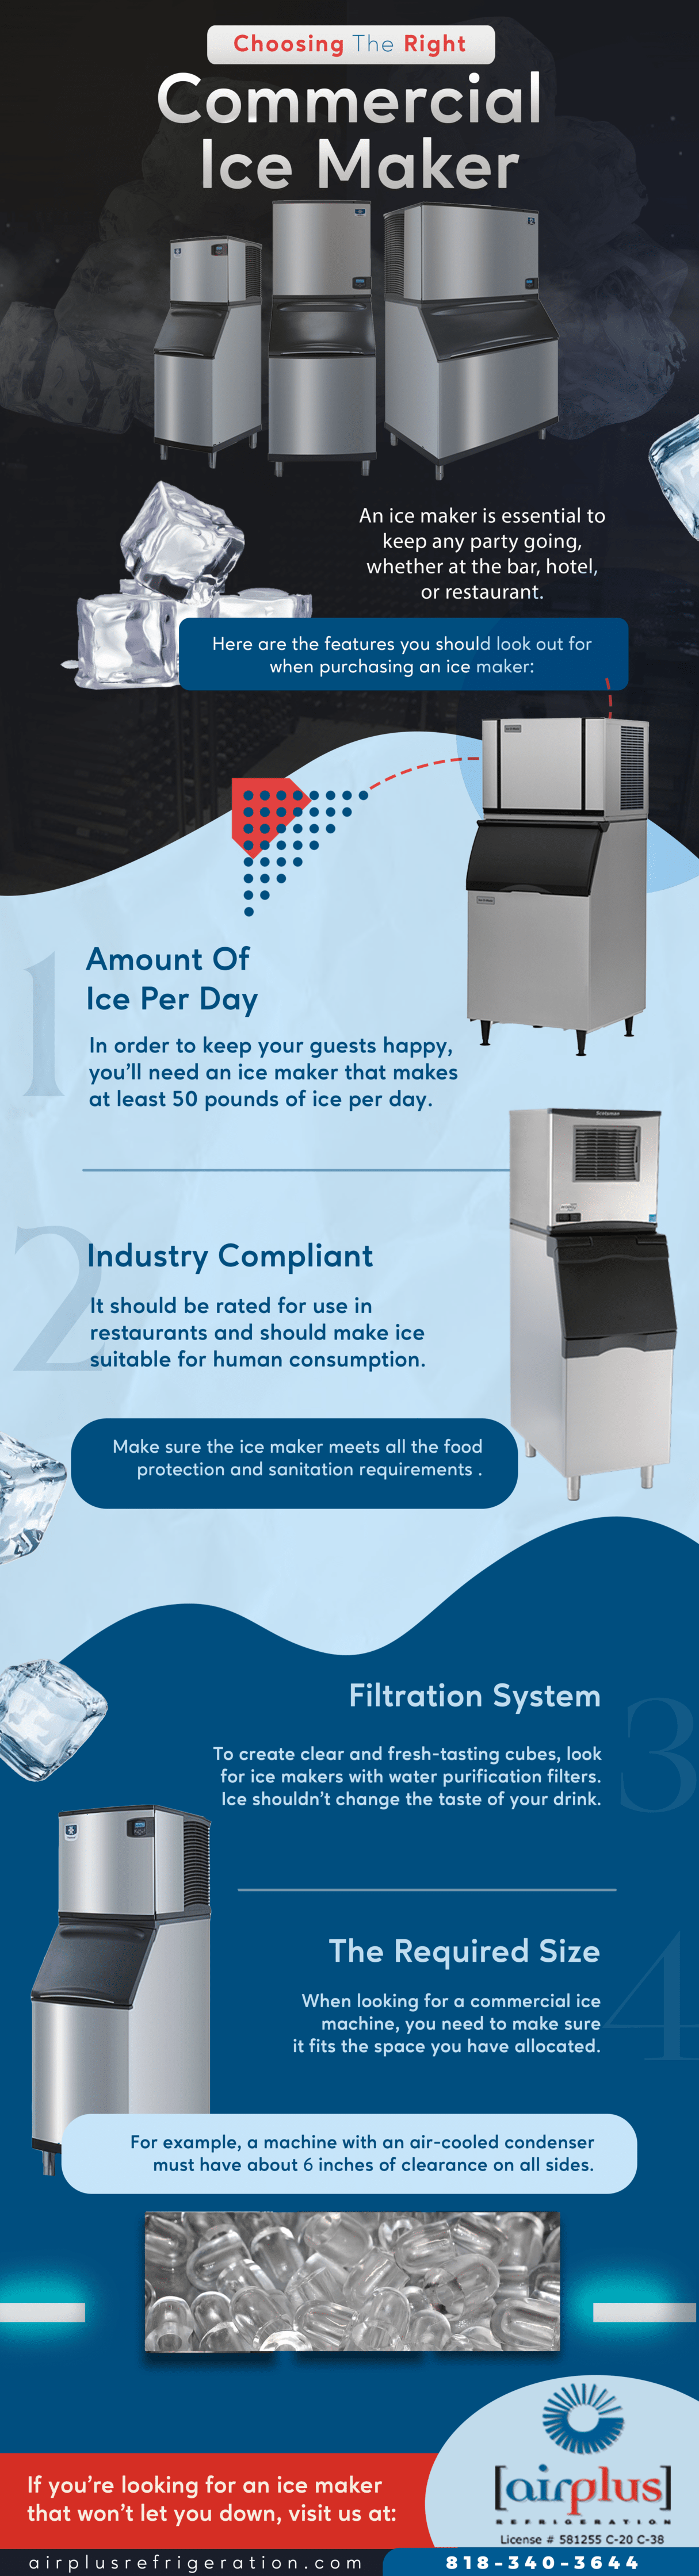 Choosing The Right Commercial Ice Maker